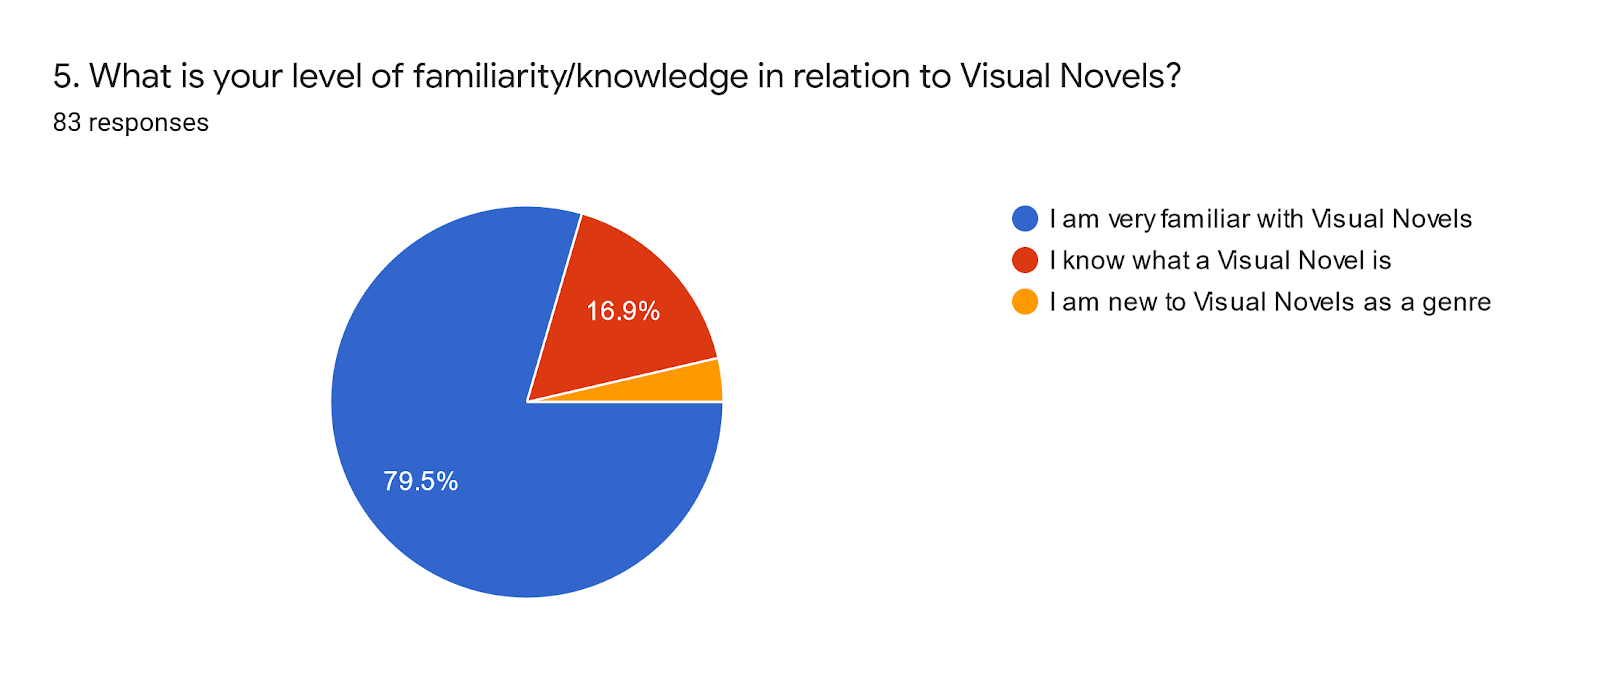 Forms response chart. Question title: 5. What is your level of familiarity/knowledge in relation to Visual Novels?. Number of responses: 83 responses.